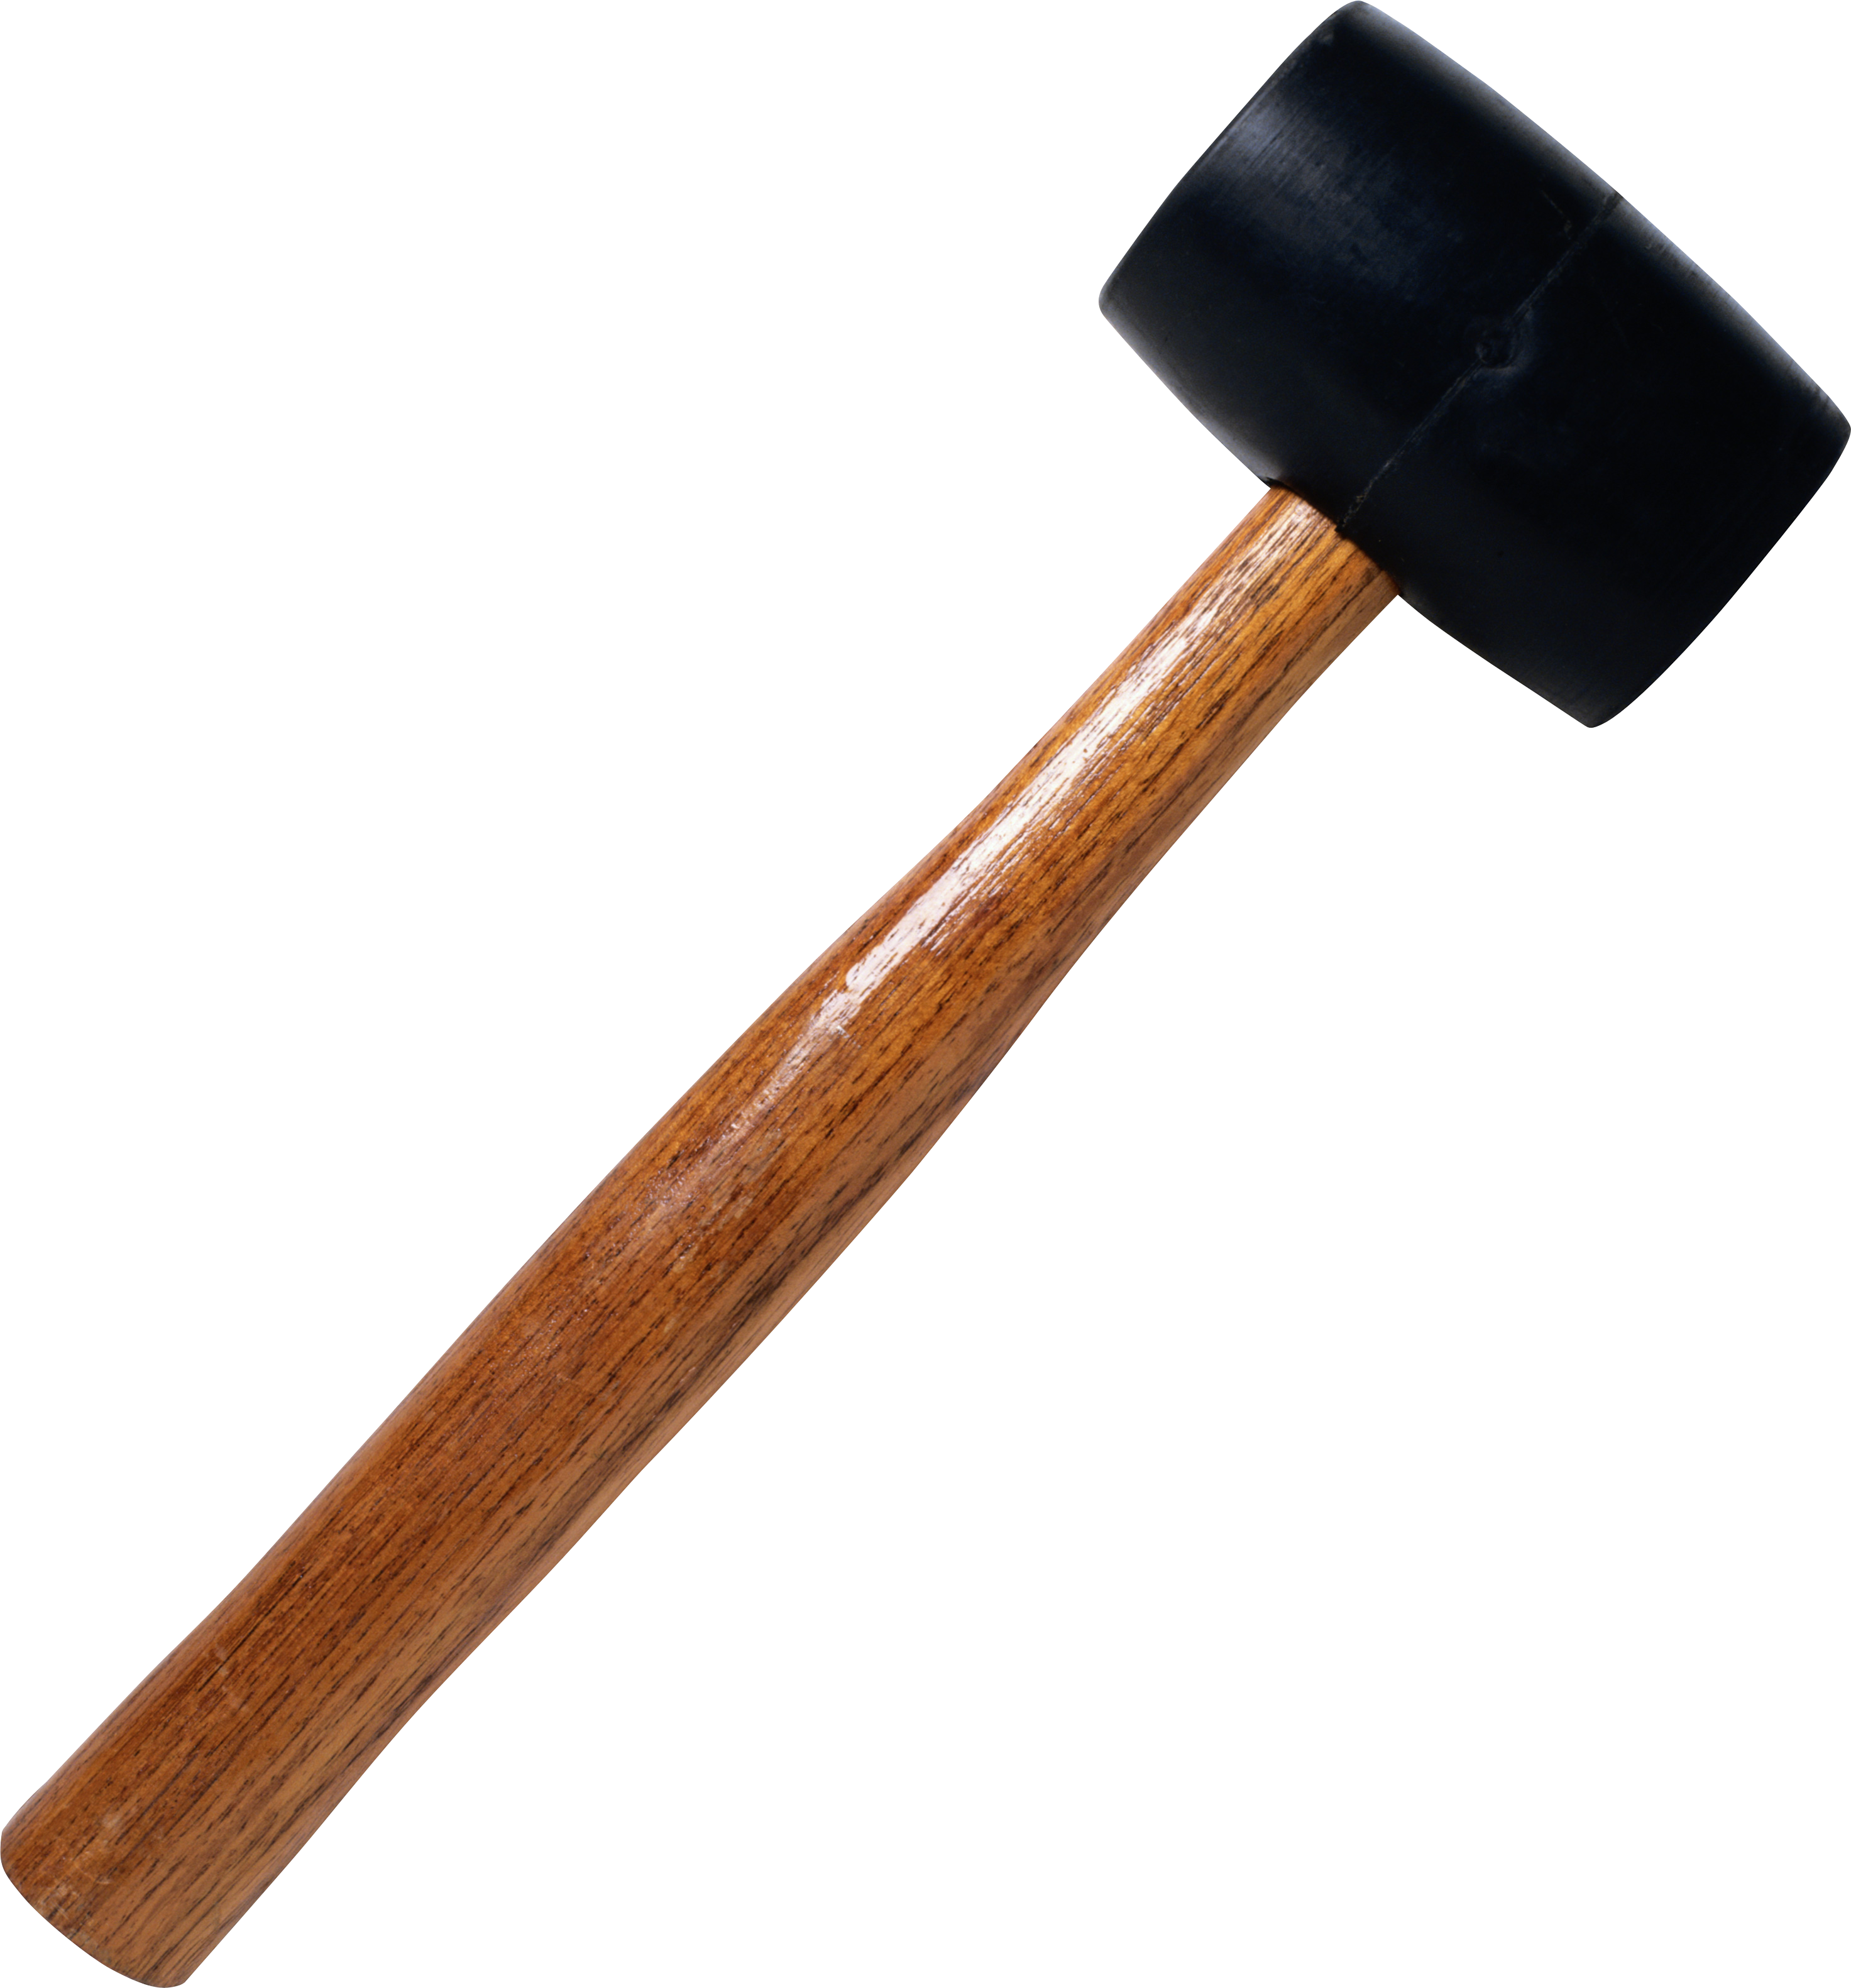 Download PNG image: Hammer PNG image, free picture